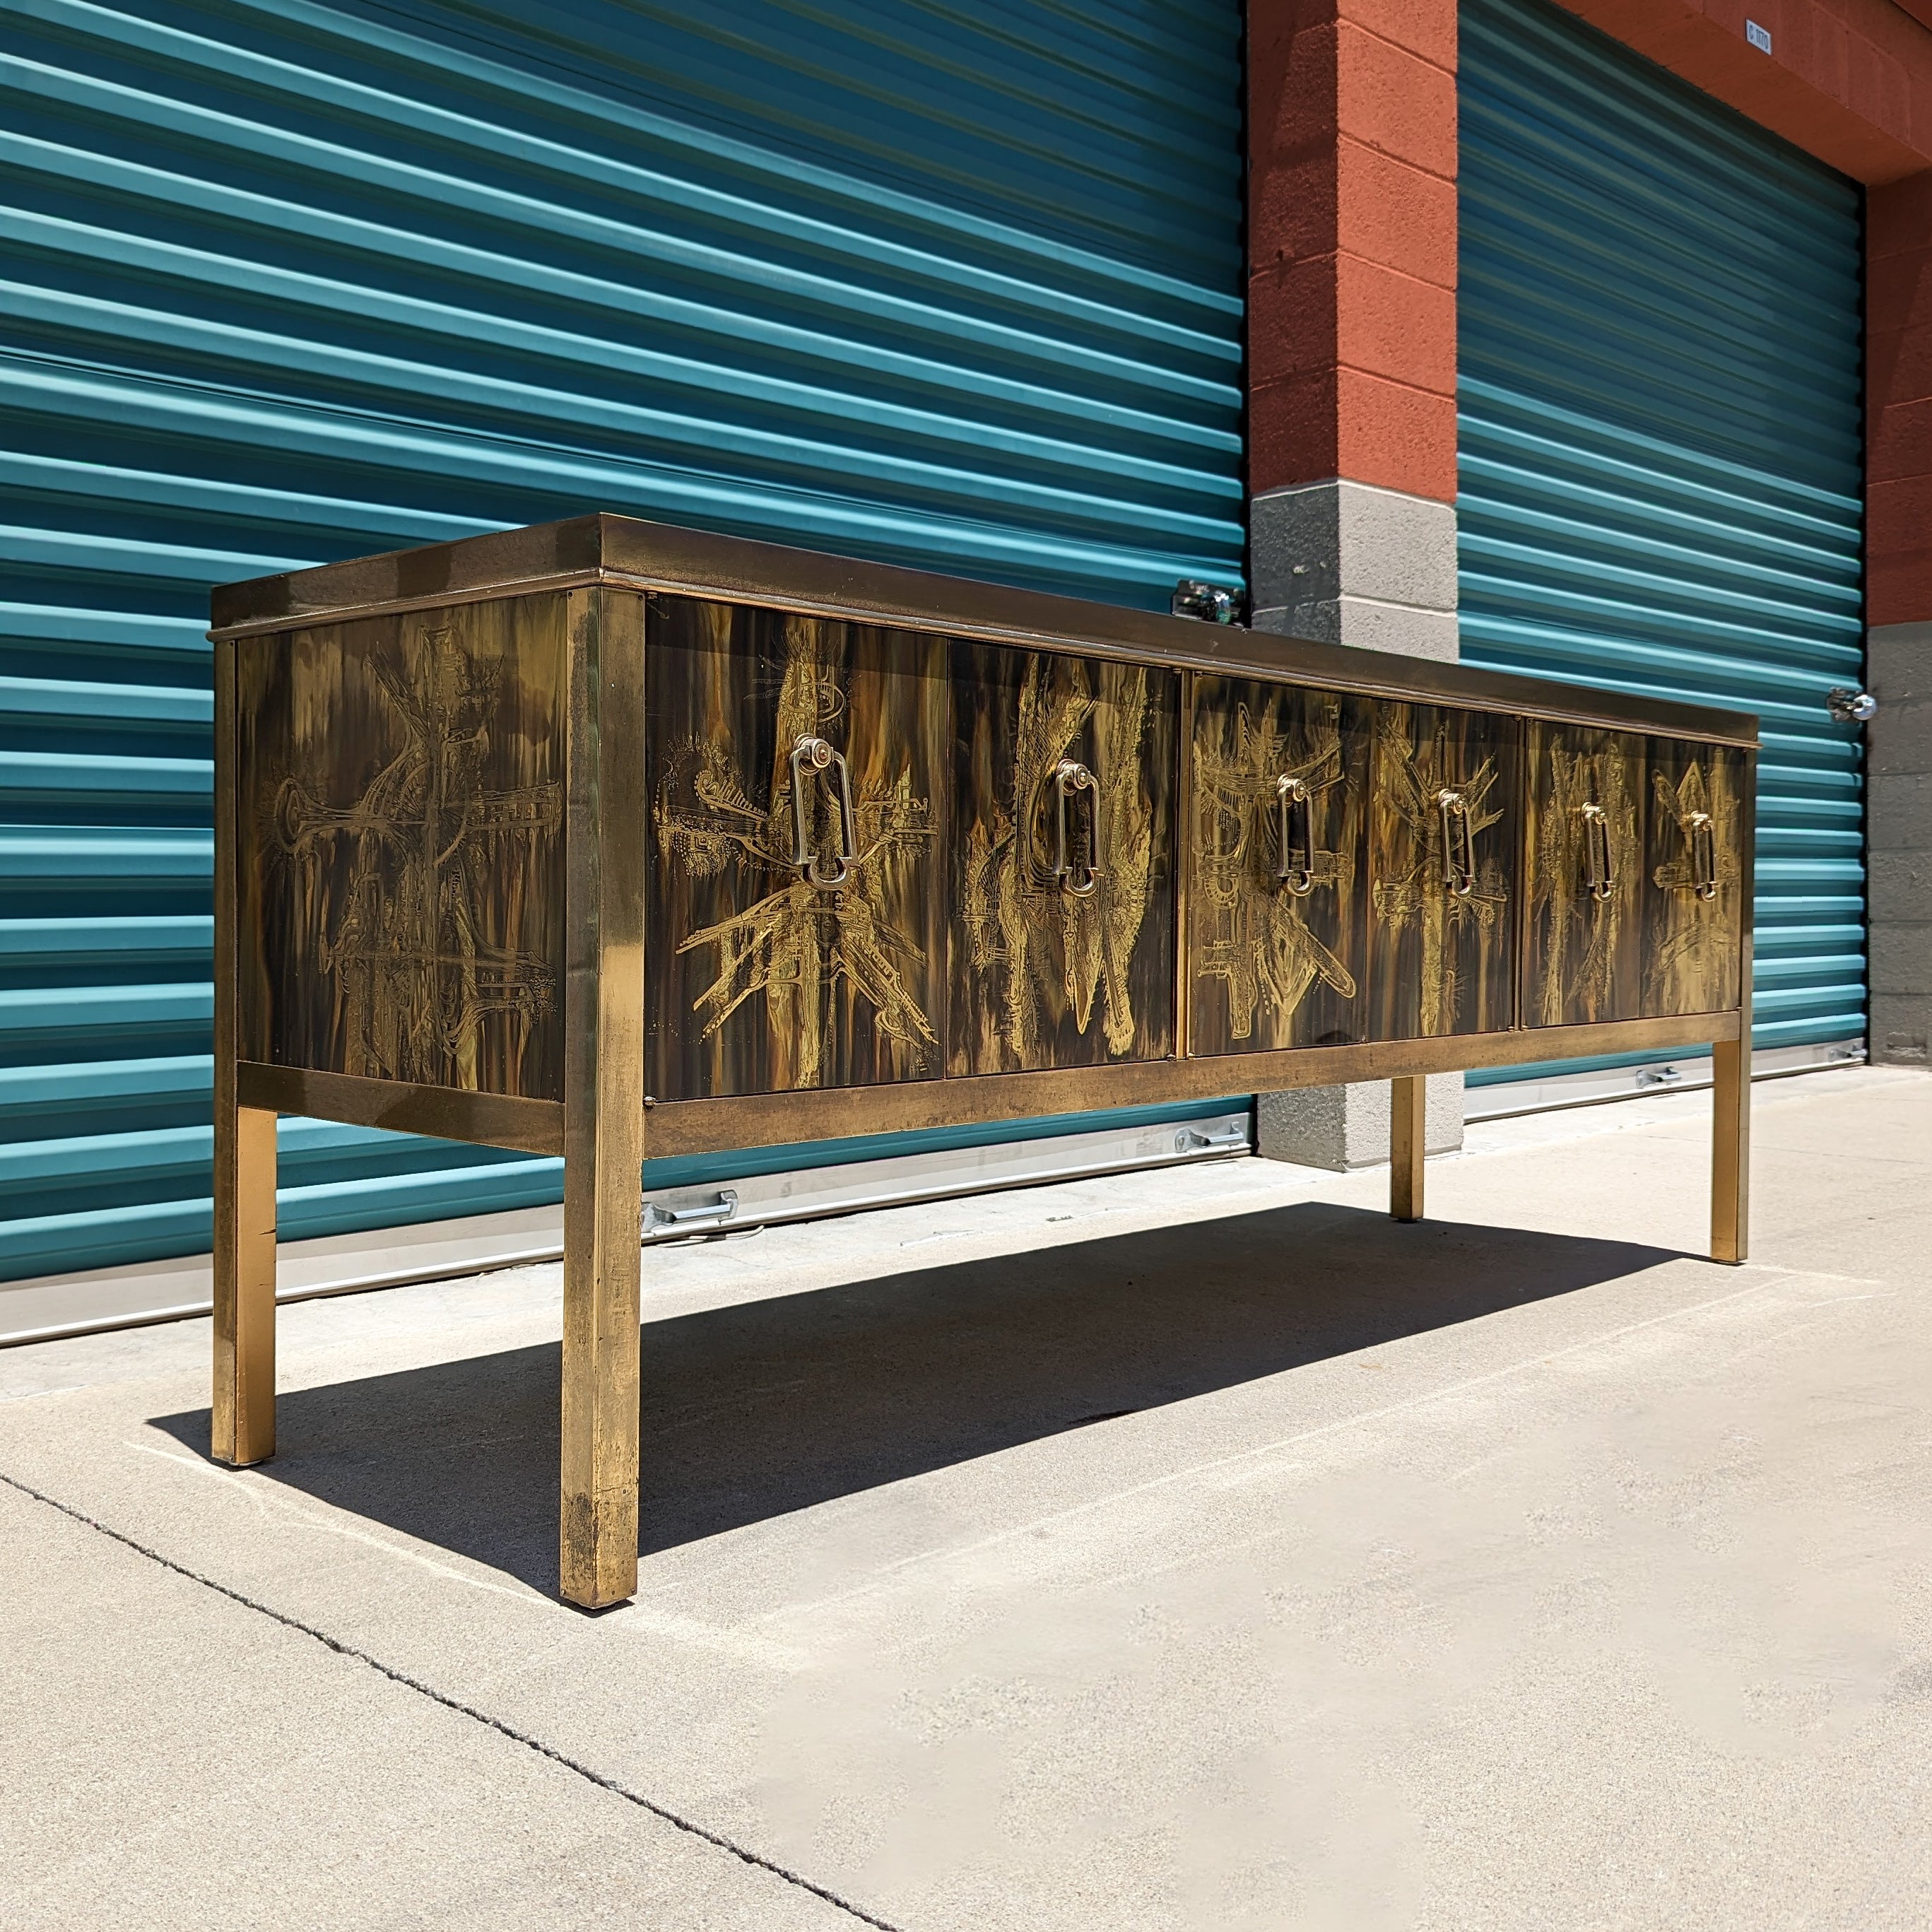 Just in, a spectacular piece designed by Bernhard Rohne for Mastercraft, c1970s sourced from original owners from the Hollywood Hills. This credenza features a brass finish with intricate etched designs throughout - top, sides, legs, and door